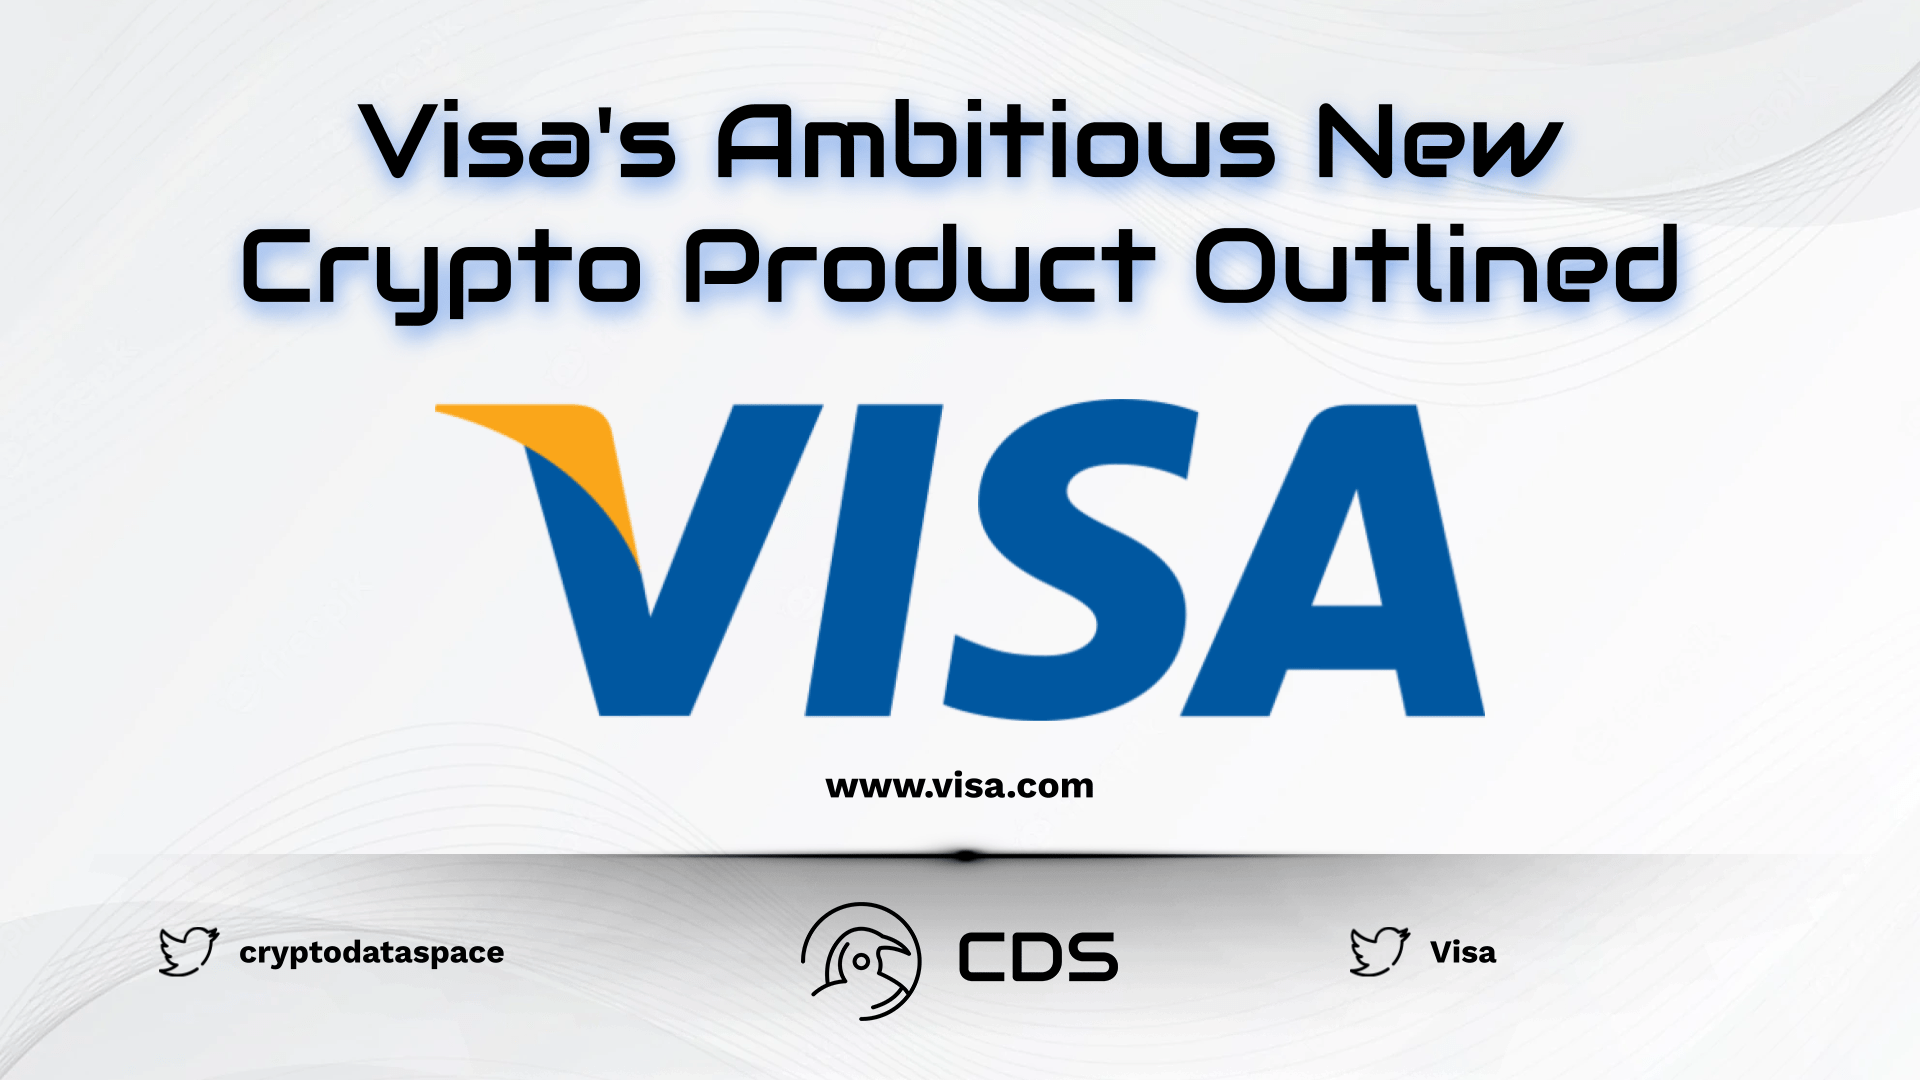 Visa's Ambitious New Crypto Product Outlined